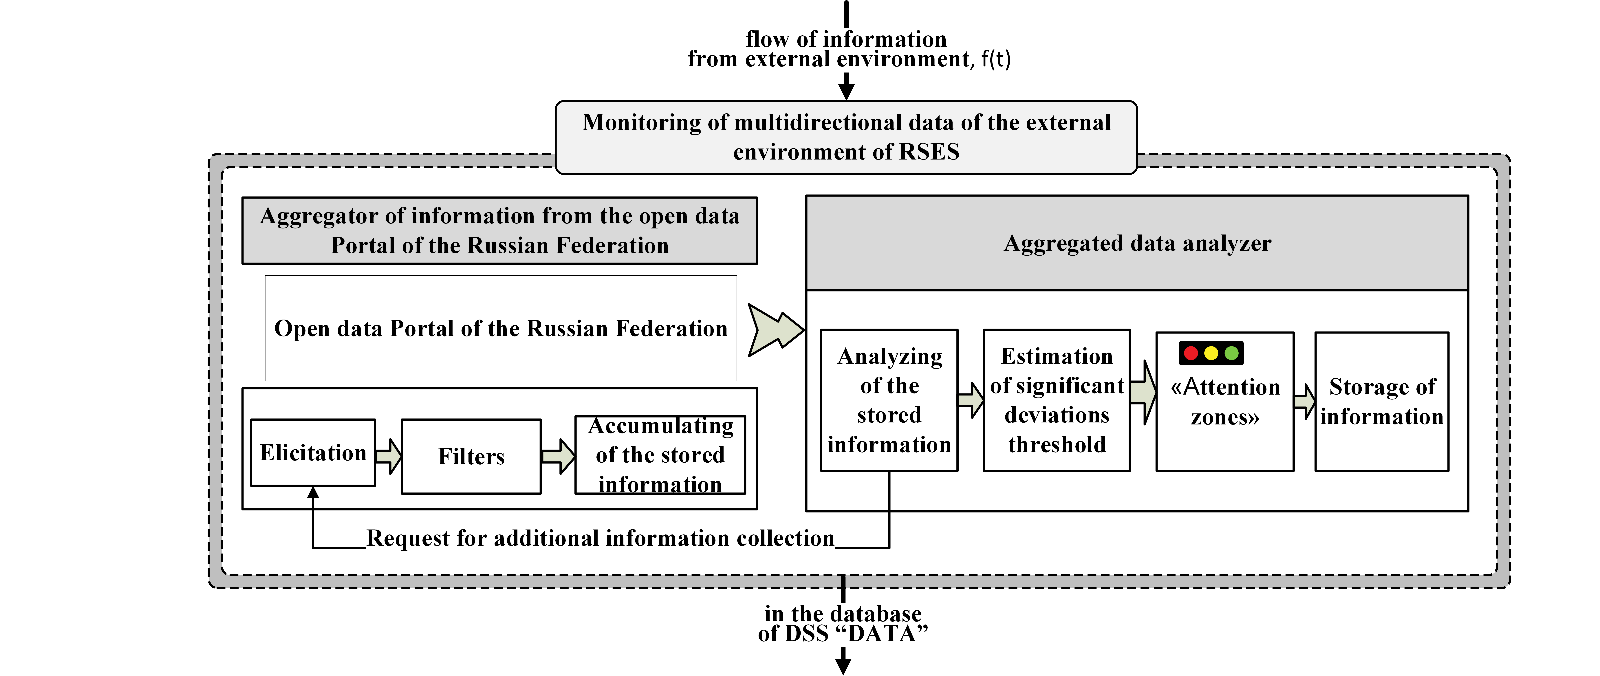 Monitoring model of multidirectional data of the external environment of RSES